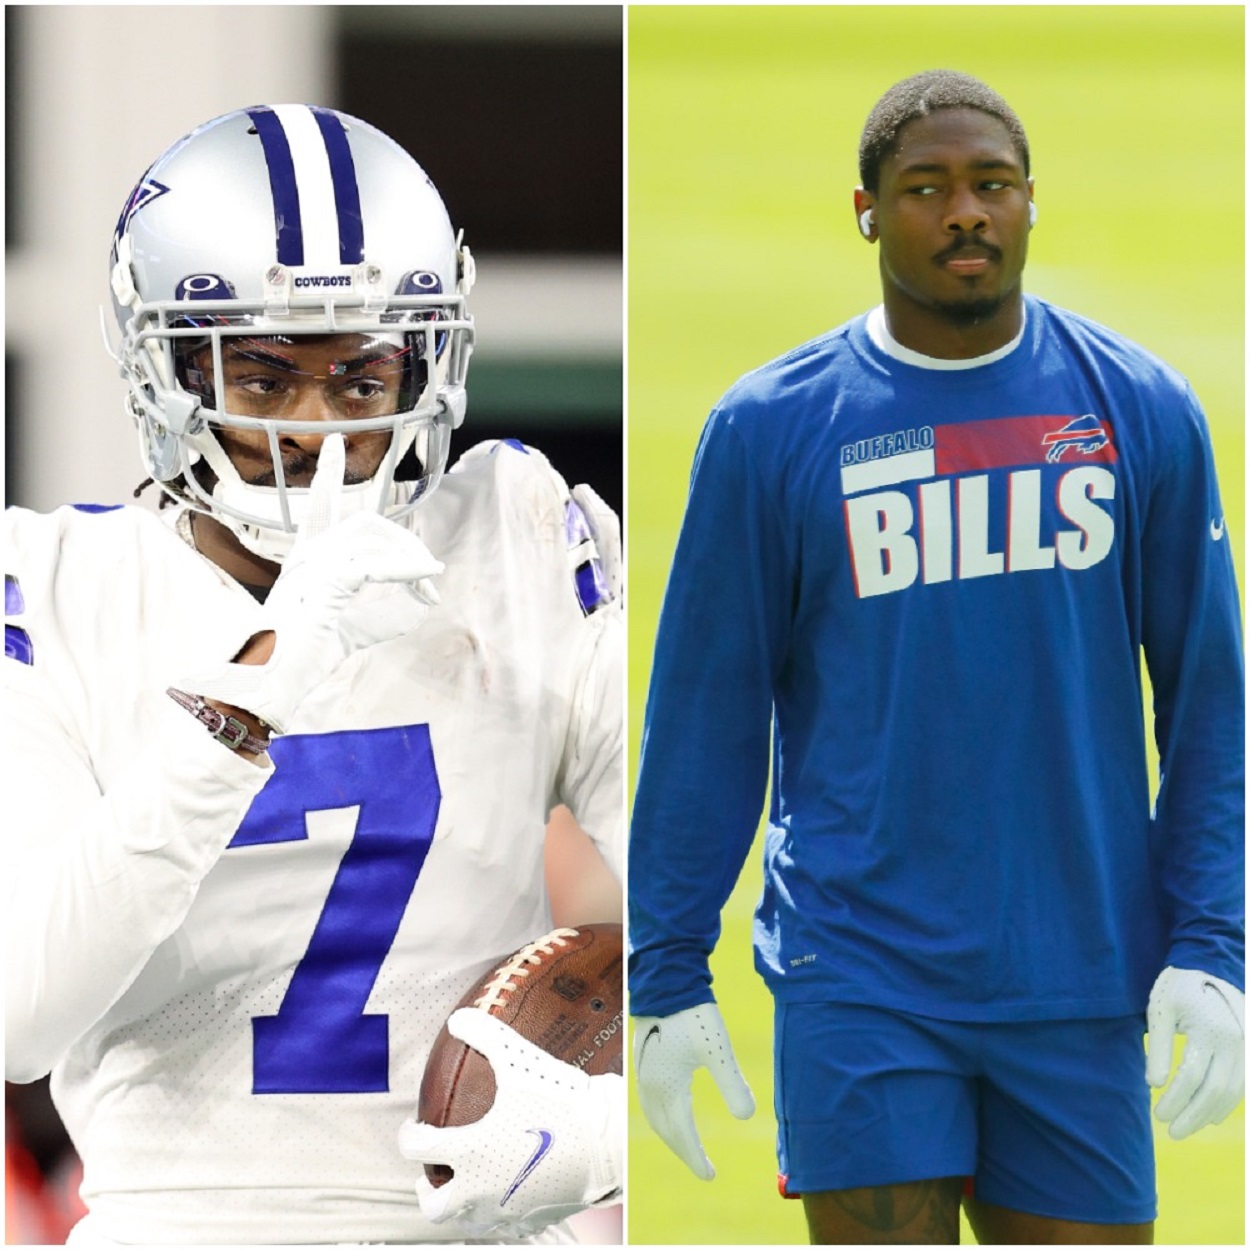 Trevon Diggs of the Dallas Cowboys and Stefon Diggs of the Buffalo Bills 